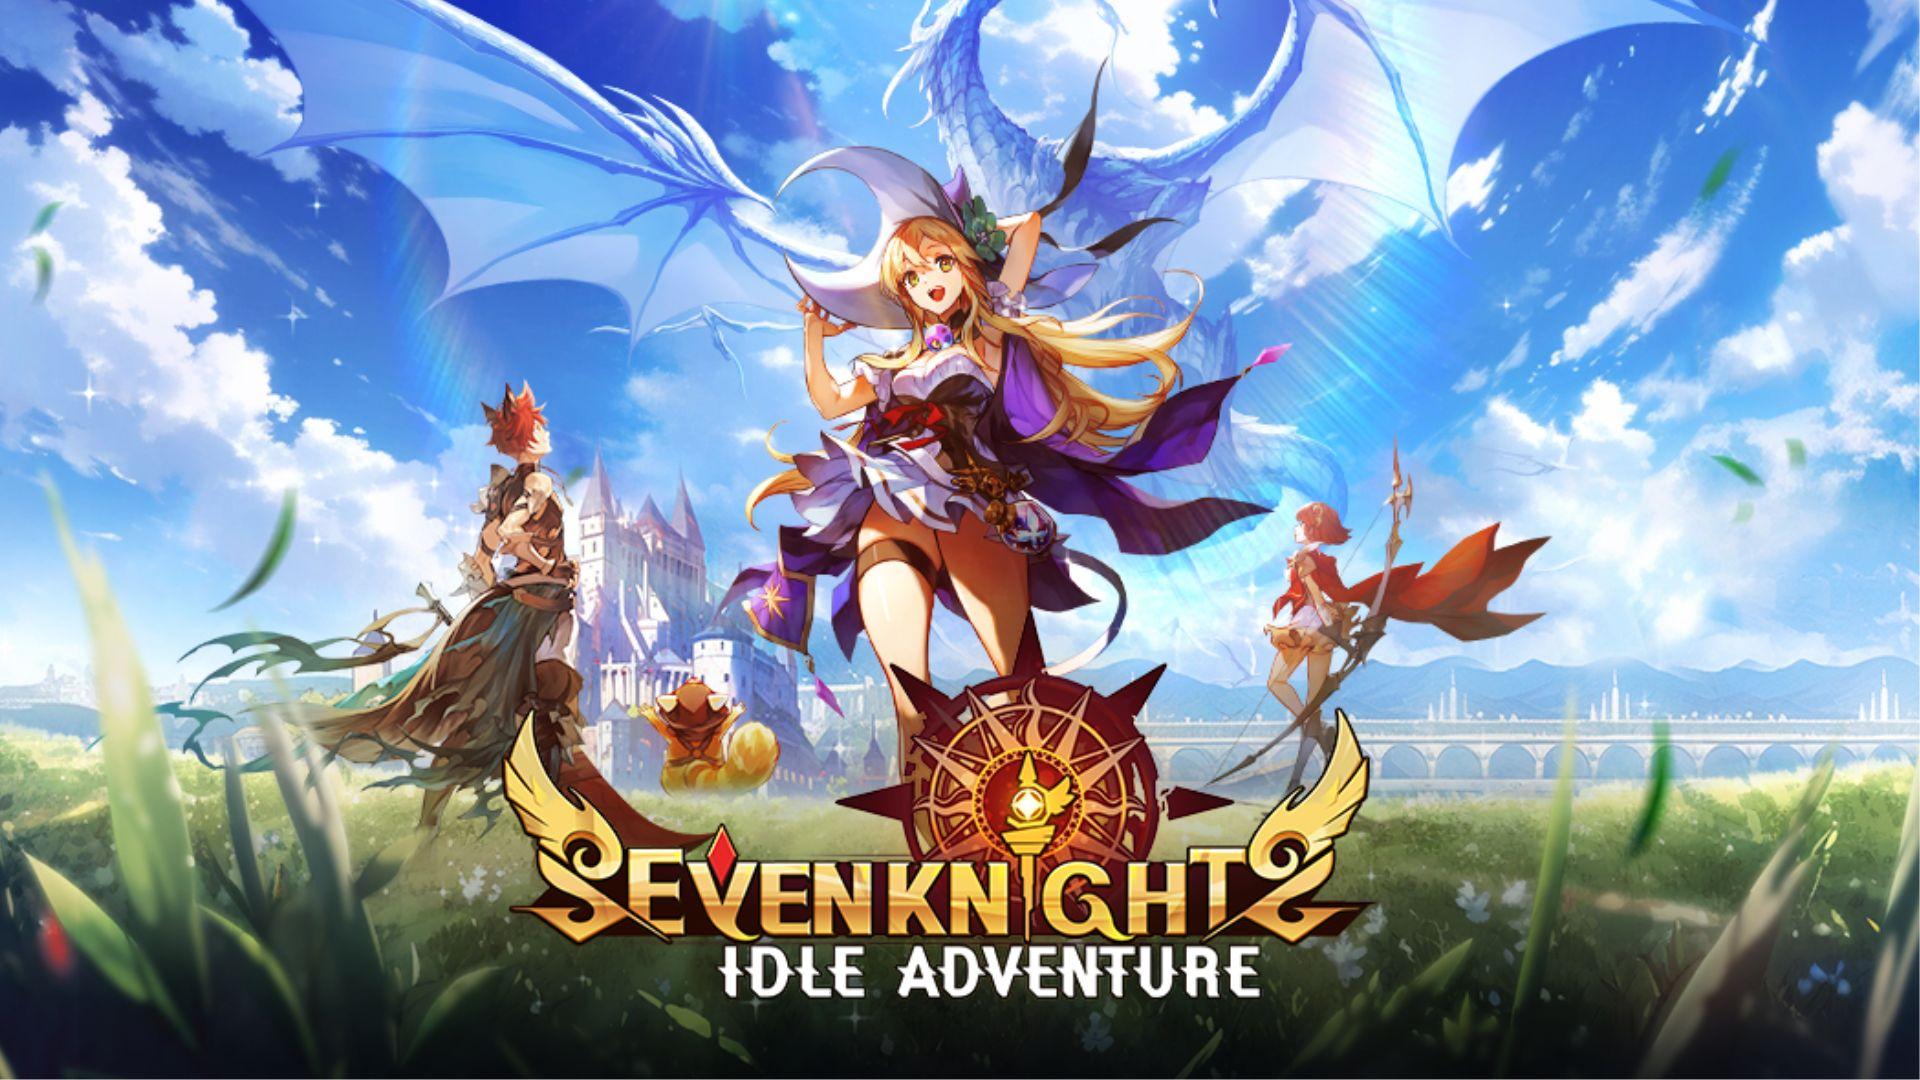 Ultimate 7 Knights Idle Adventure Tier List and Best Team - UPDATED